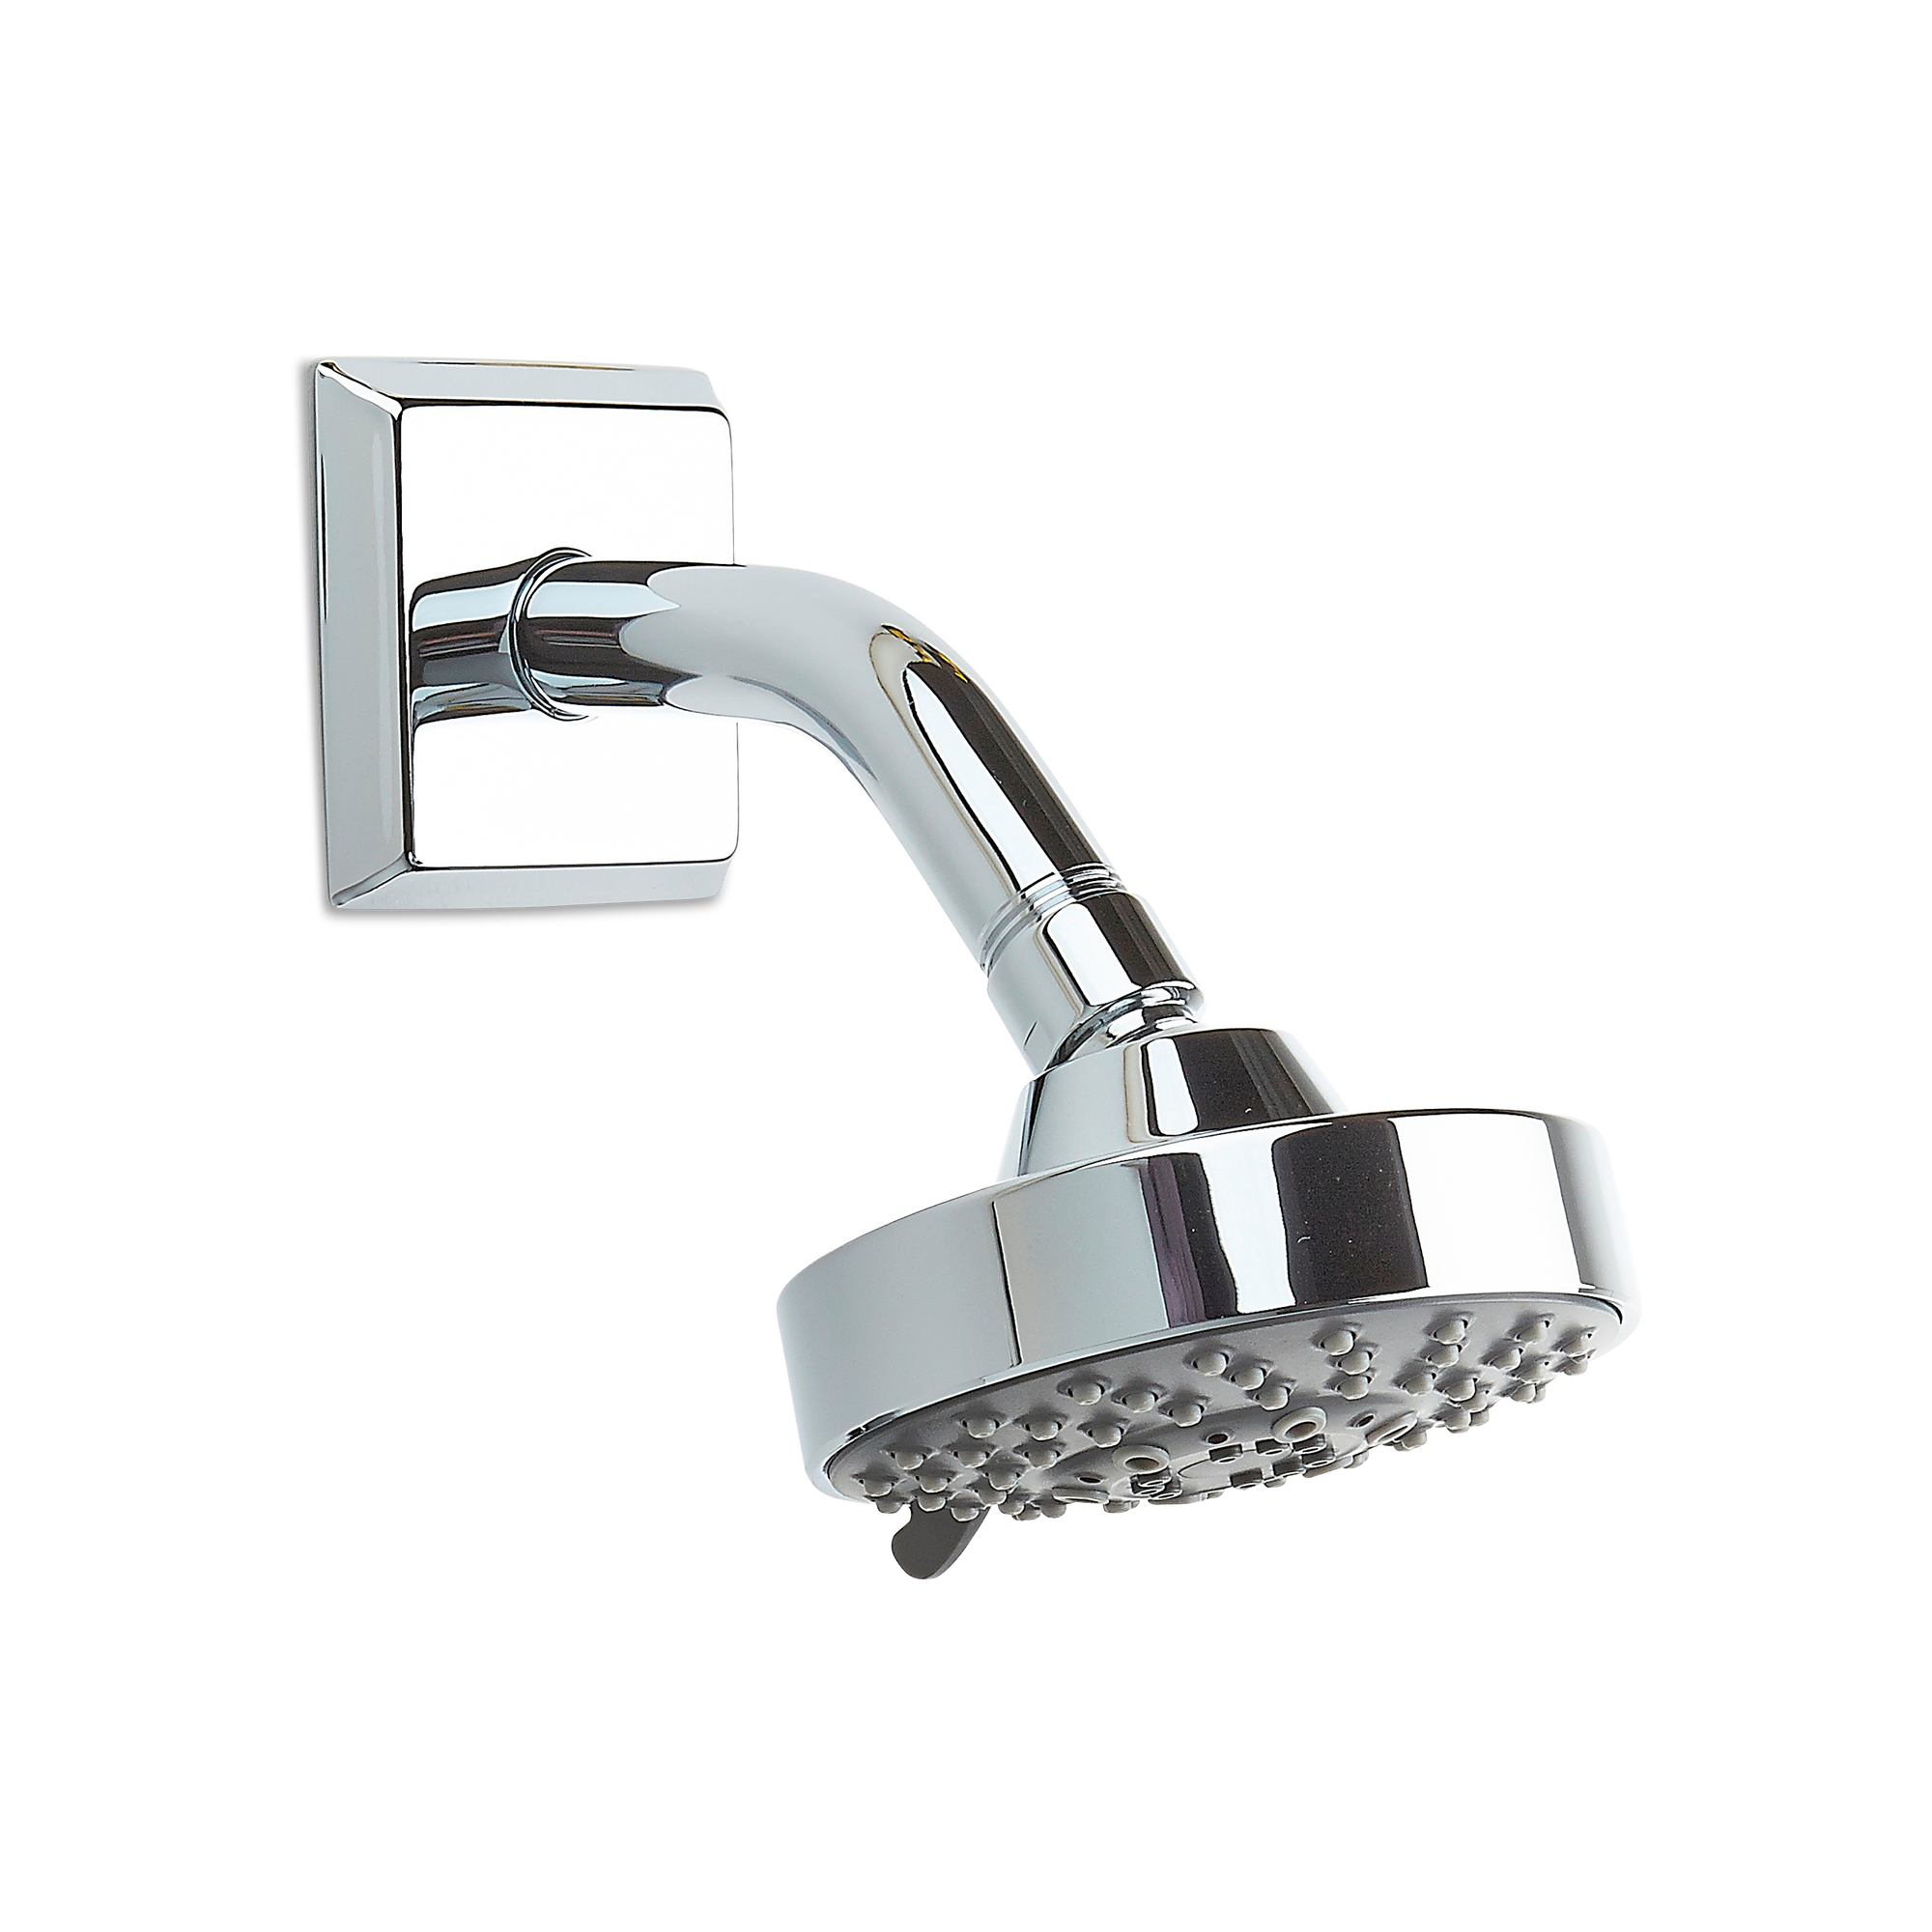 A sleek, transitional shower head with an arm and flange.